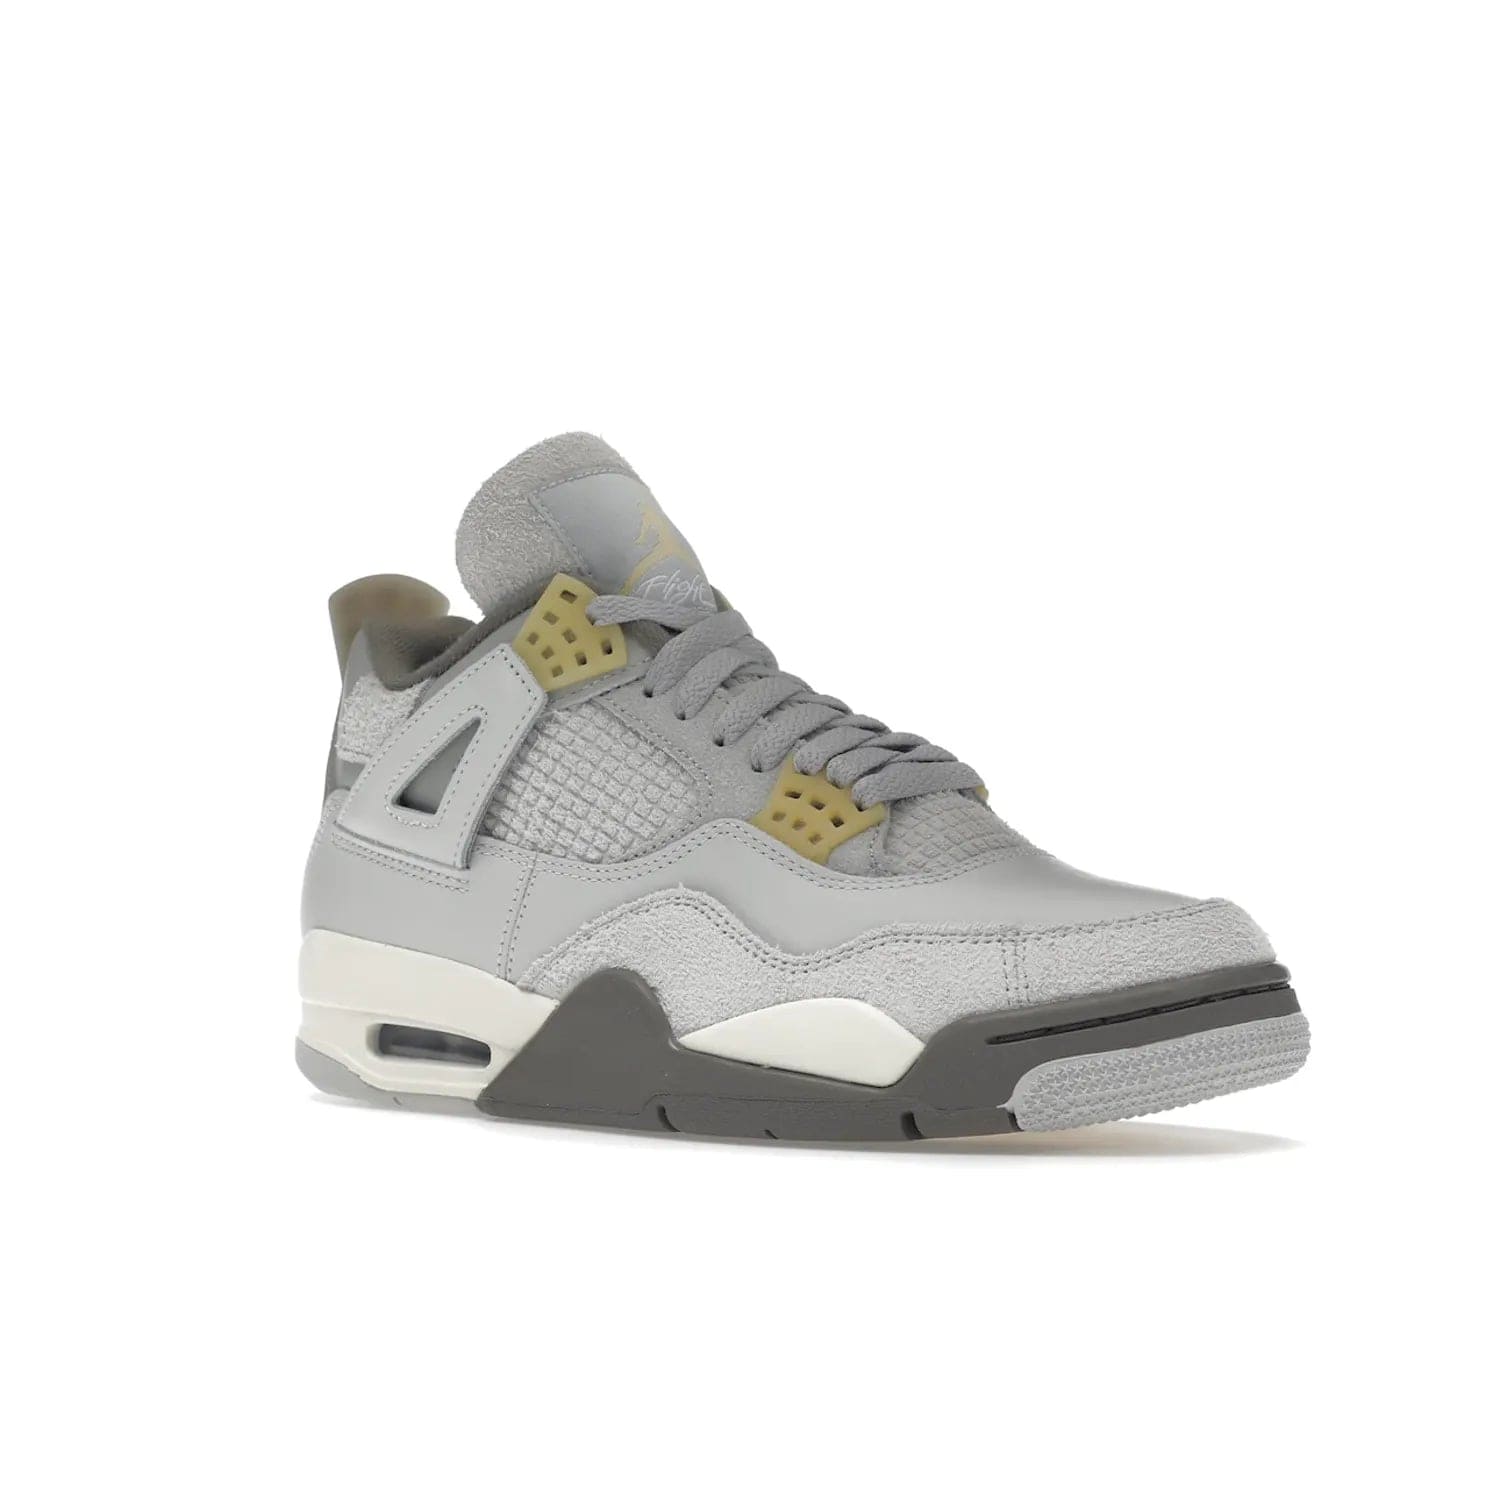 Jordan 4 Retro SE Craft Photon Dust - Image 5 - Only at www.BallersClubKickz.com - Upgrade your shoe collection with the Air Jordan 4 Retro SE Craft Photon Dust. This luxurious sneaker features a combination of suede and leather with unique grey tones like Photon Dust, Pale Vanilla, Off White, Grey Fog, Flat Pewter, and Sail. Available February 11, 2023.